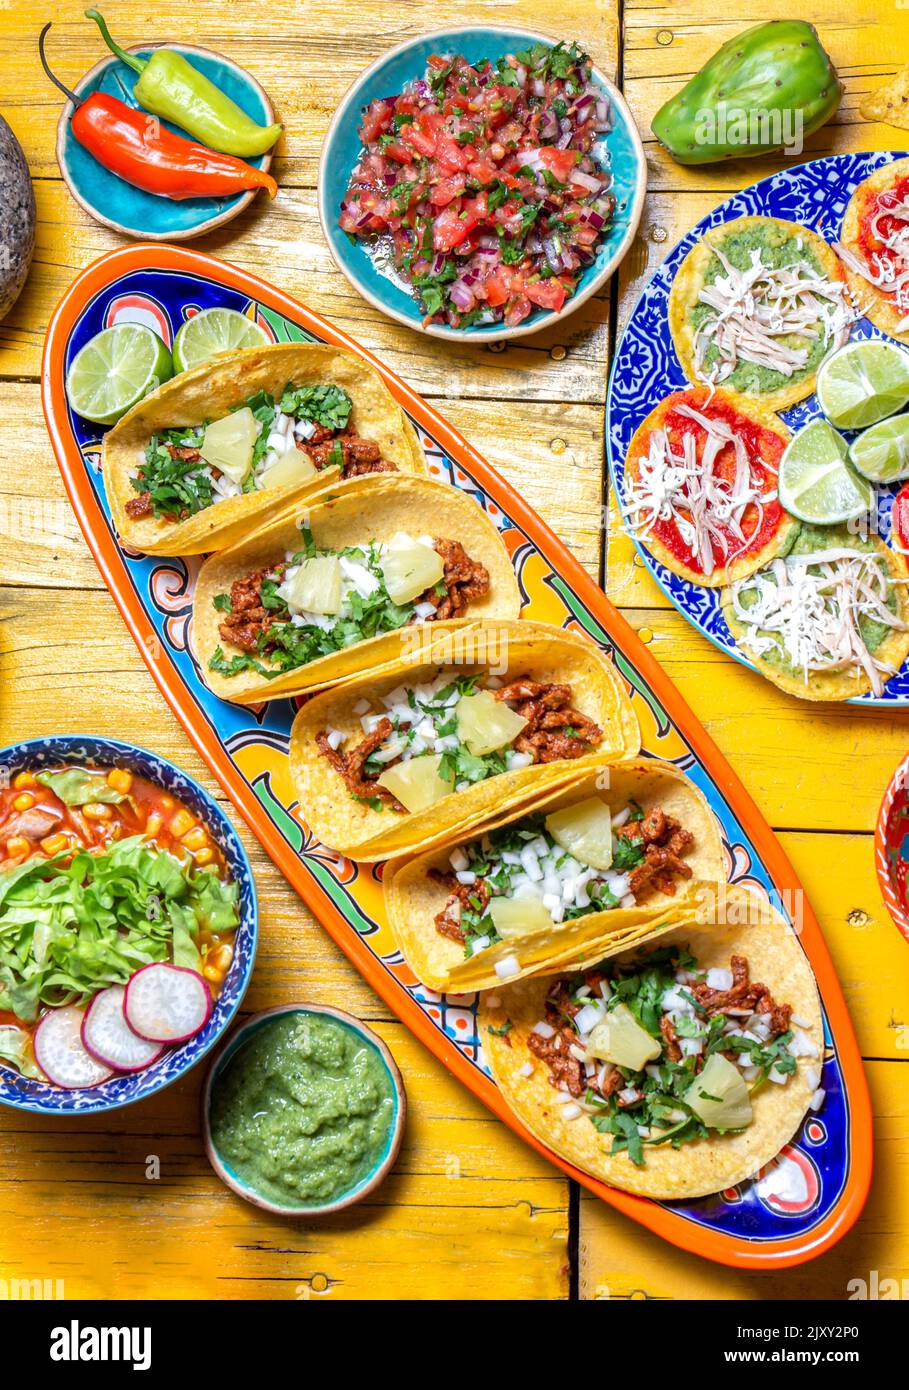 Mexican festive food for independence day - independencia chiles en nogada, tacos al pastor, chalupas pozole, tamales, chicken with mole poblano sauce Stock Photo